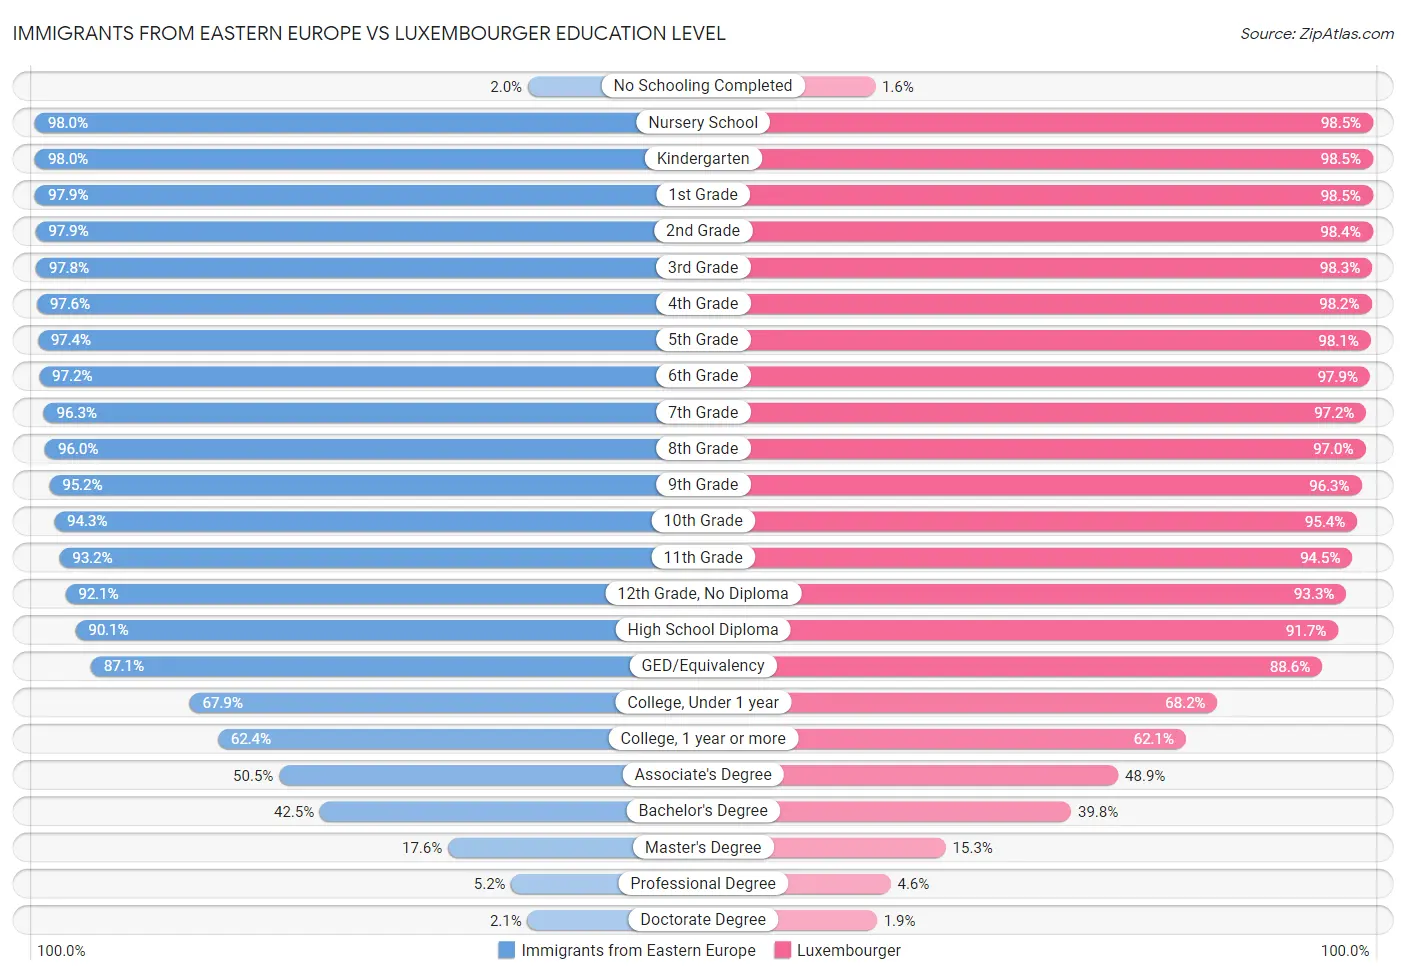 Immigrants from Eastern Europe vs Luxembourger Education Level